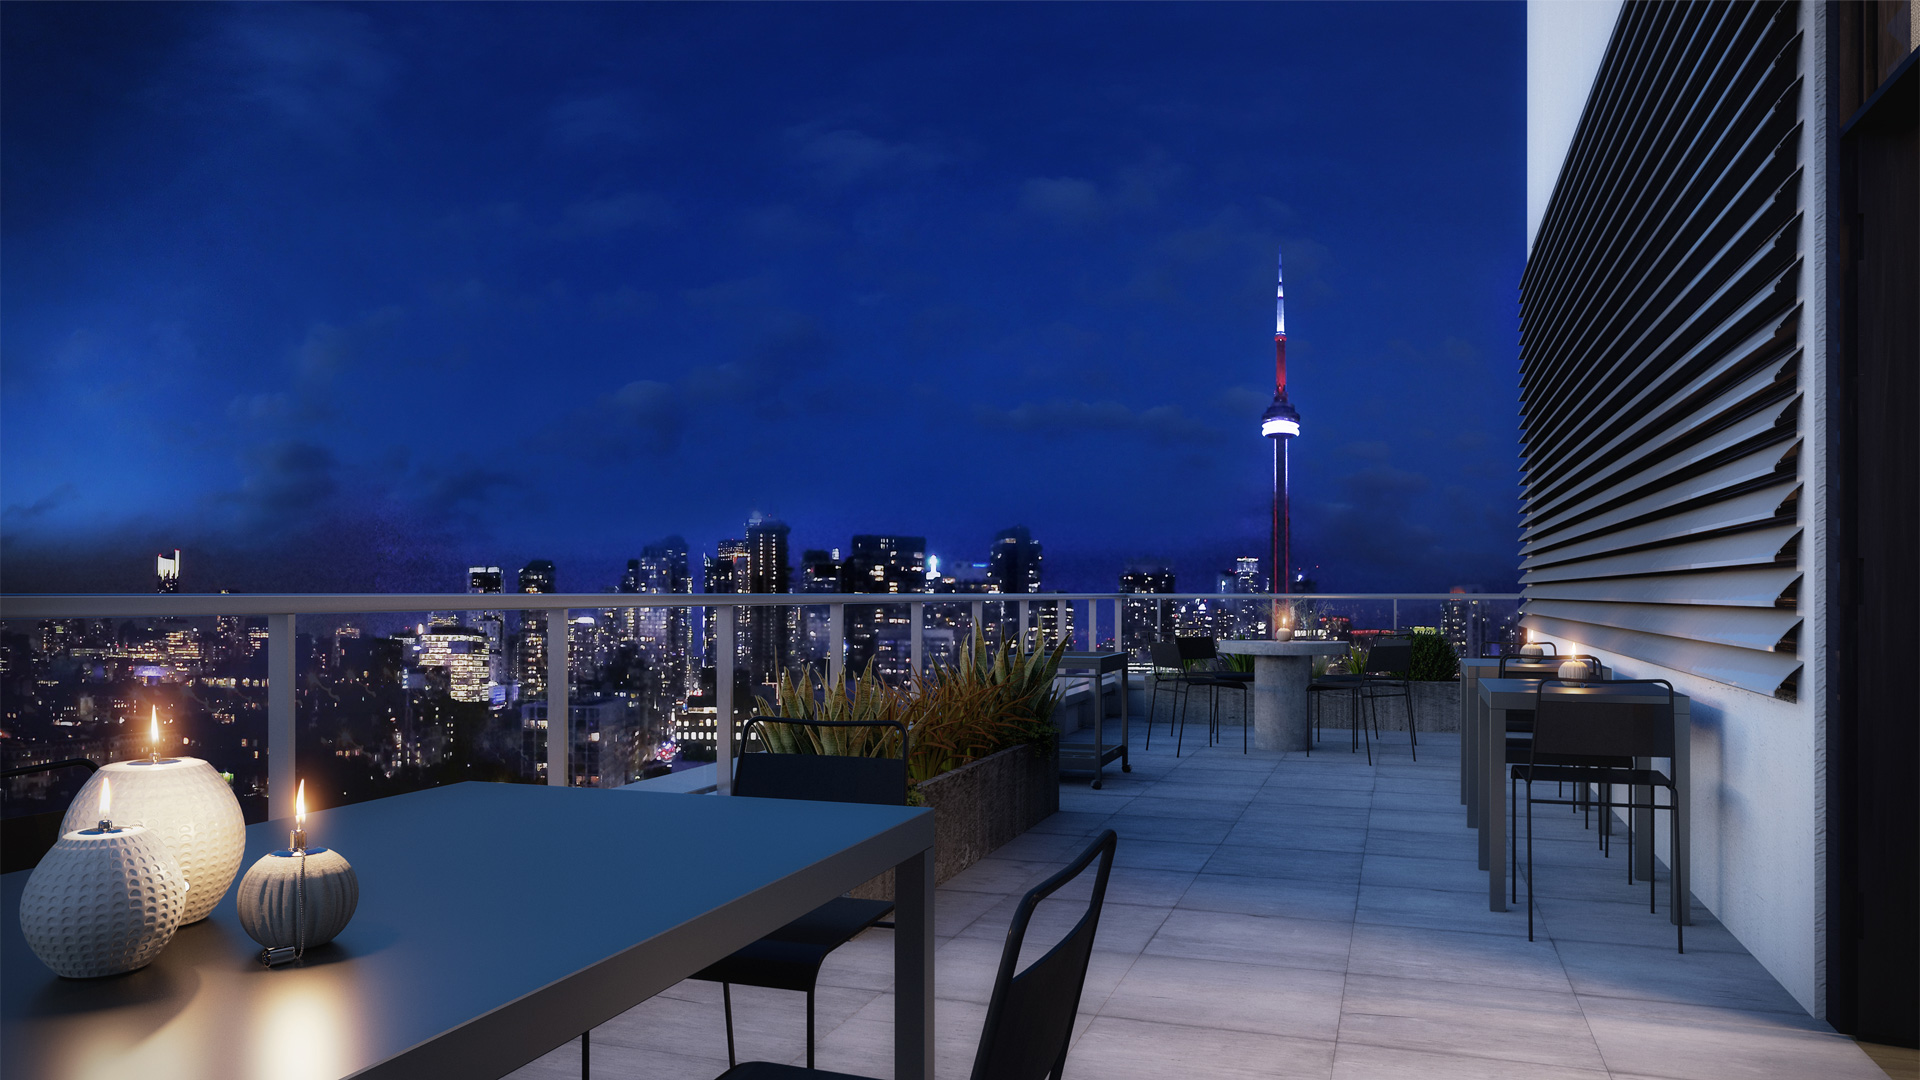 Concept art of Kingly Residences rooftop deck at night with tablets, candles and CN Tower lights in background.